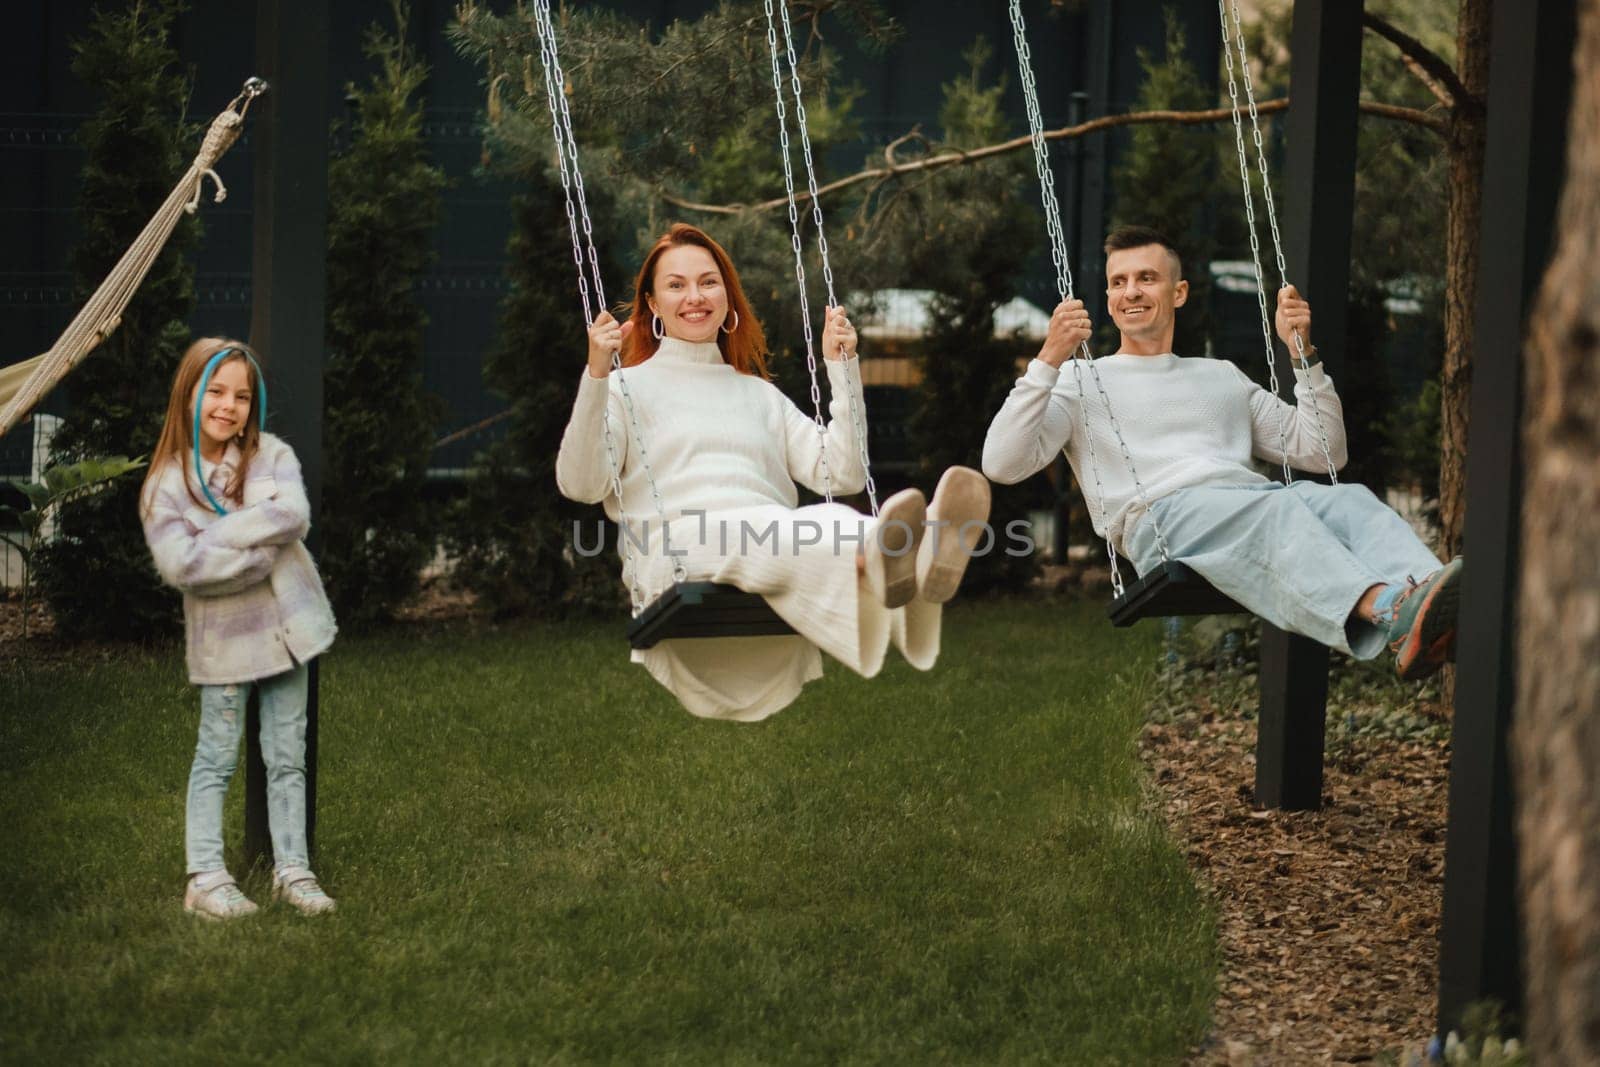 Mom and dad are riding on a swing and there is a daughter standing next to them. The family is resting on a swing.